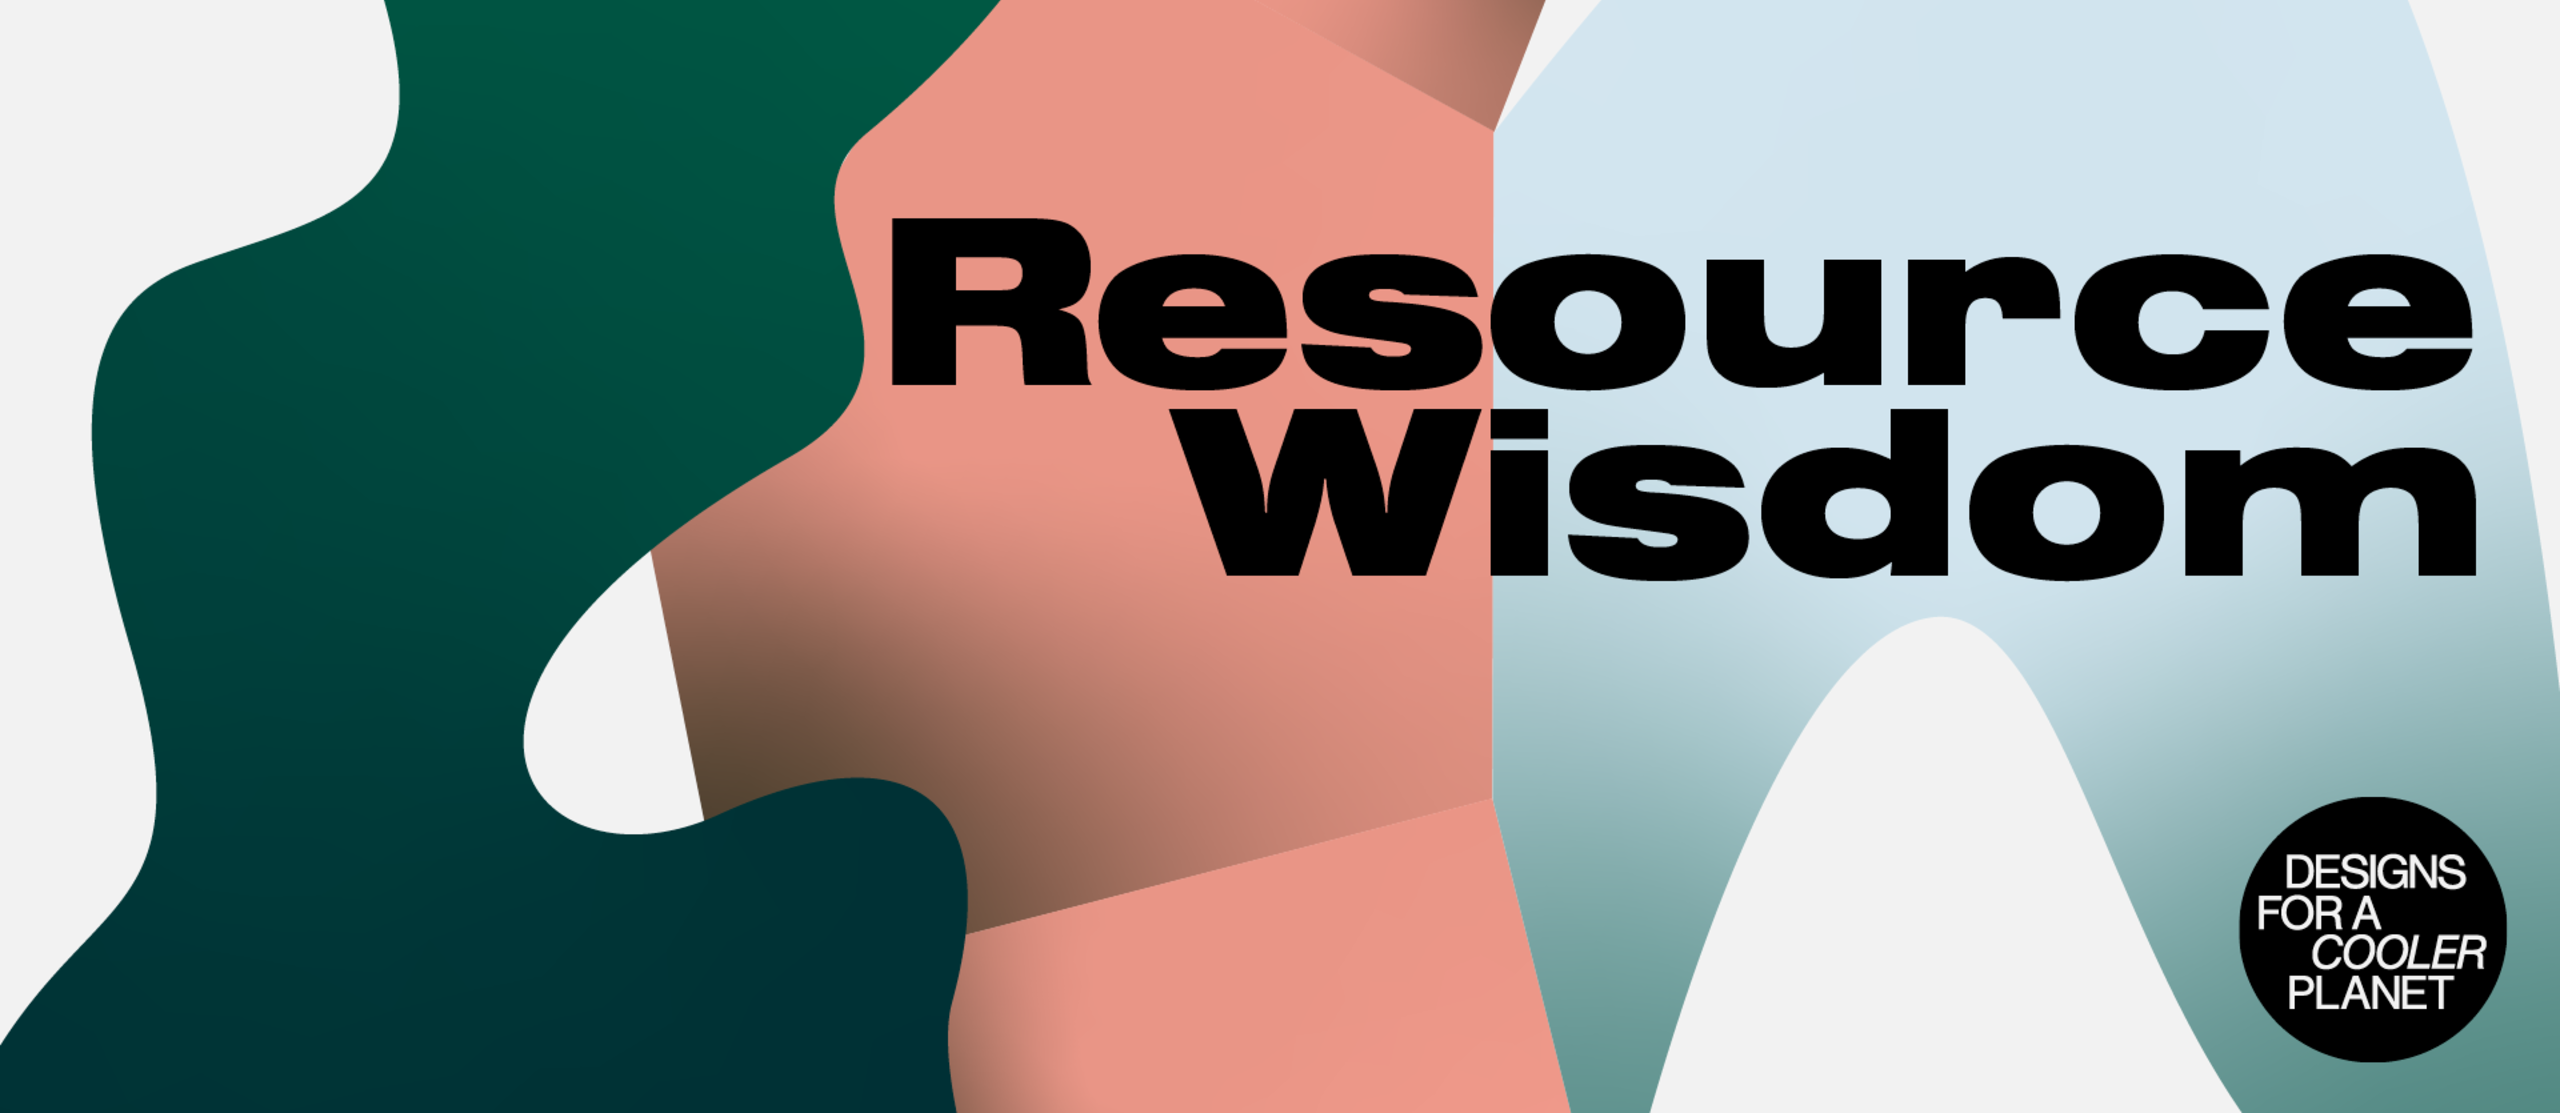 Resource Wisdom - Designs for a Cooler Planet 2021